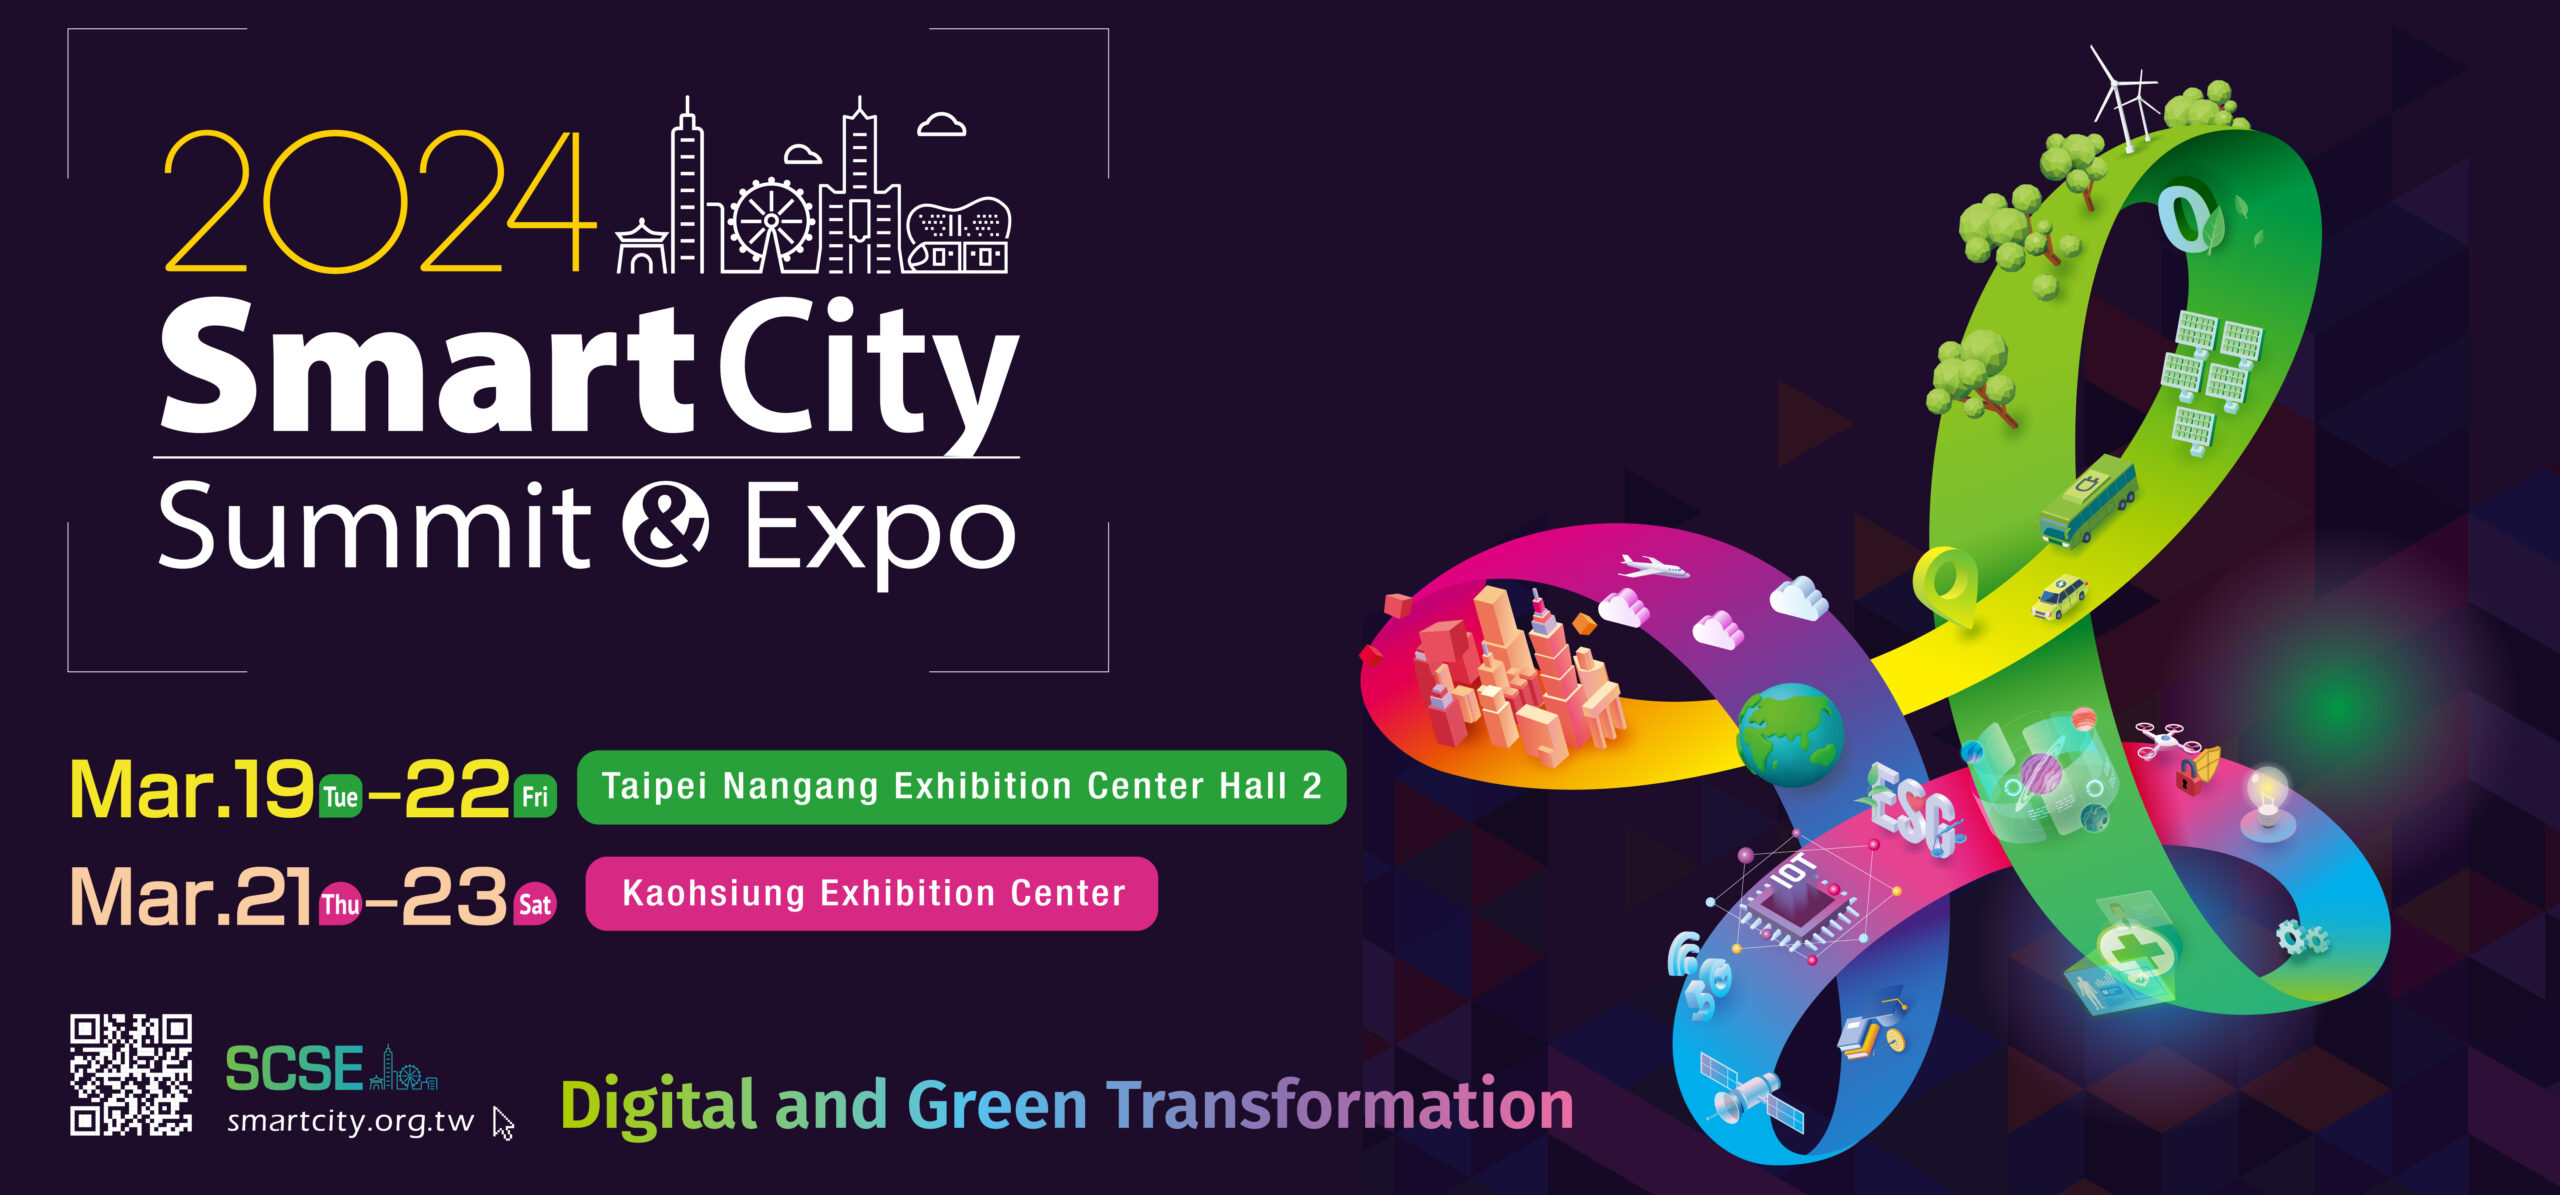 replantin’ will participate in the Smart City Summit & Expo (SCSE) in Taiwan